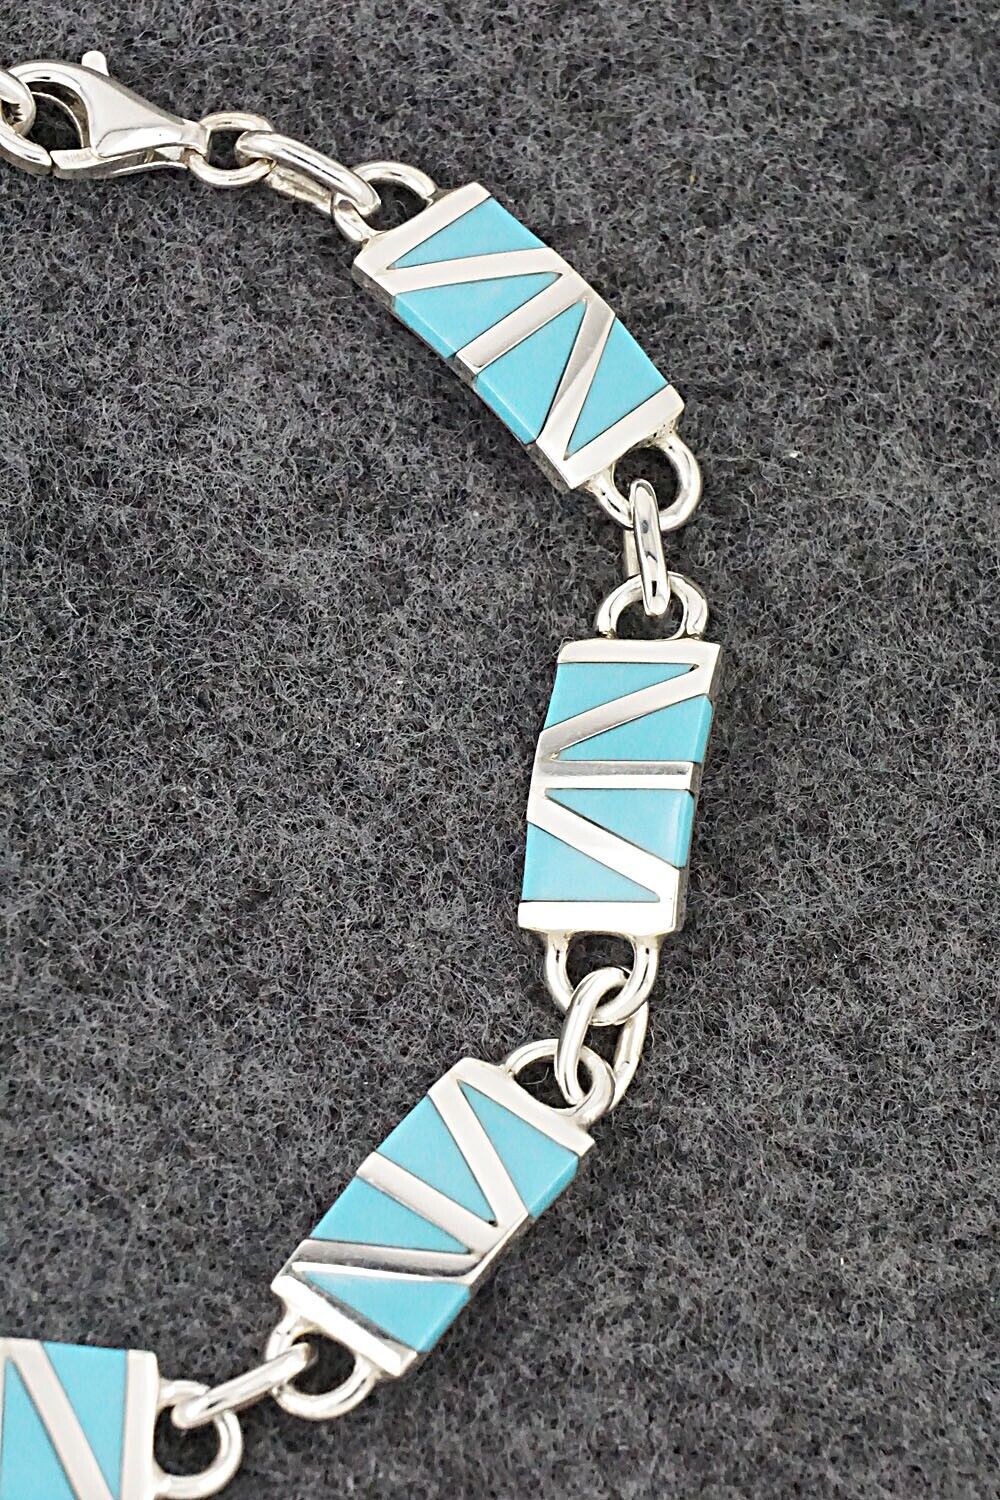 Turquoise & Sterling Silver Link Bracelet - Wilfred Siutza